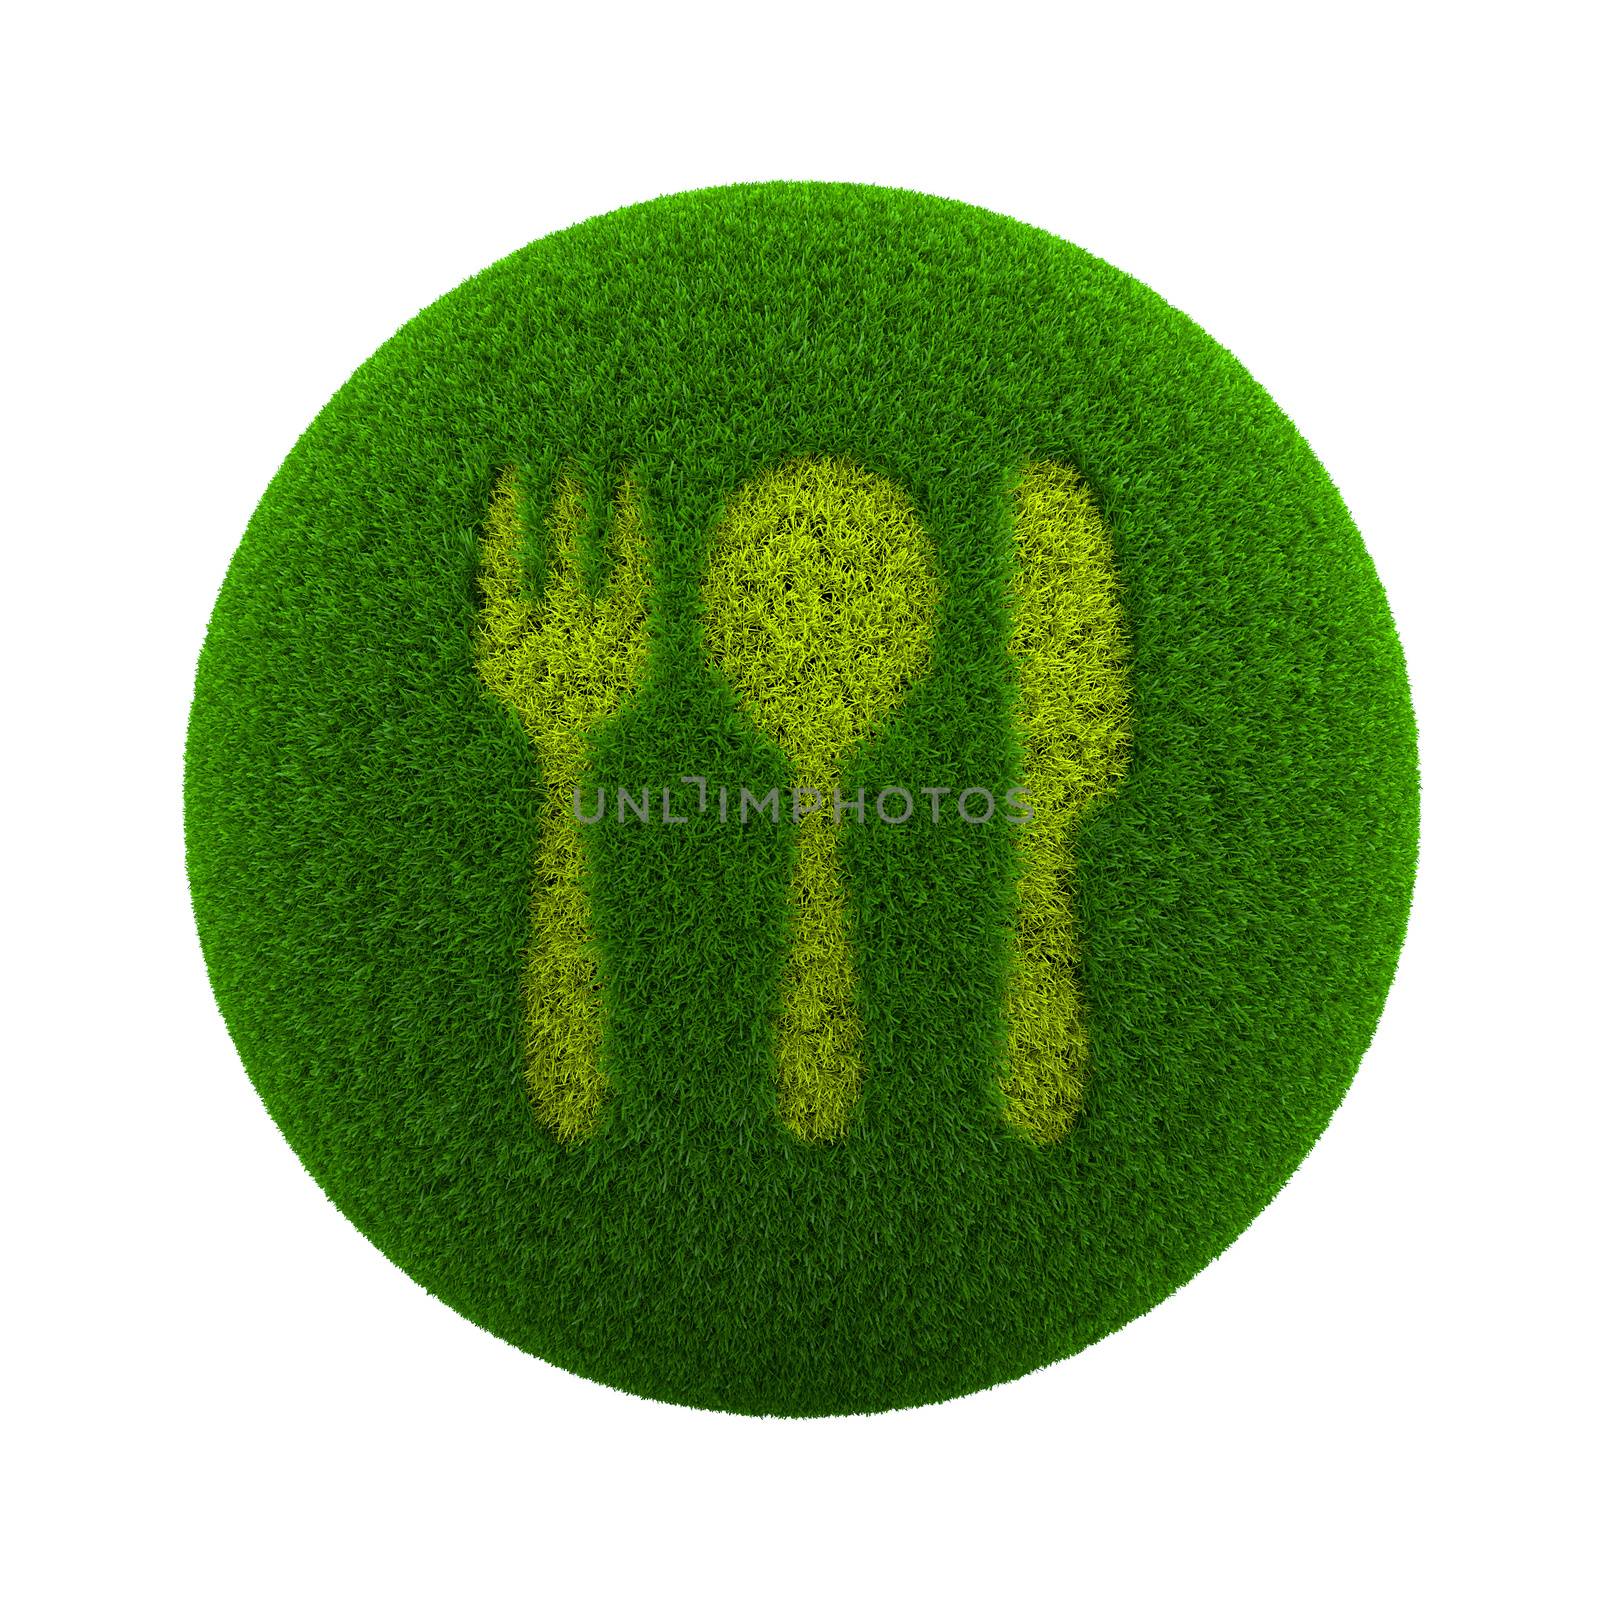 Green Globe with Grass Cutted in the Shape of Cutlery Symbol 3D Illustration Isolated on White Background